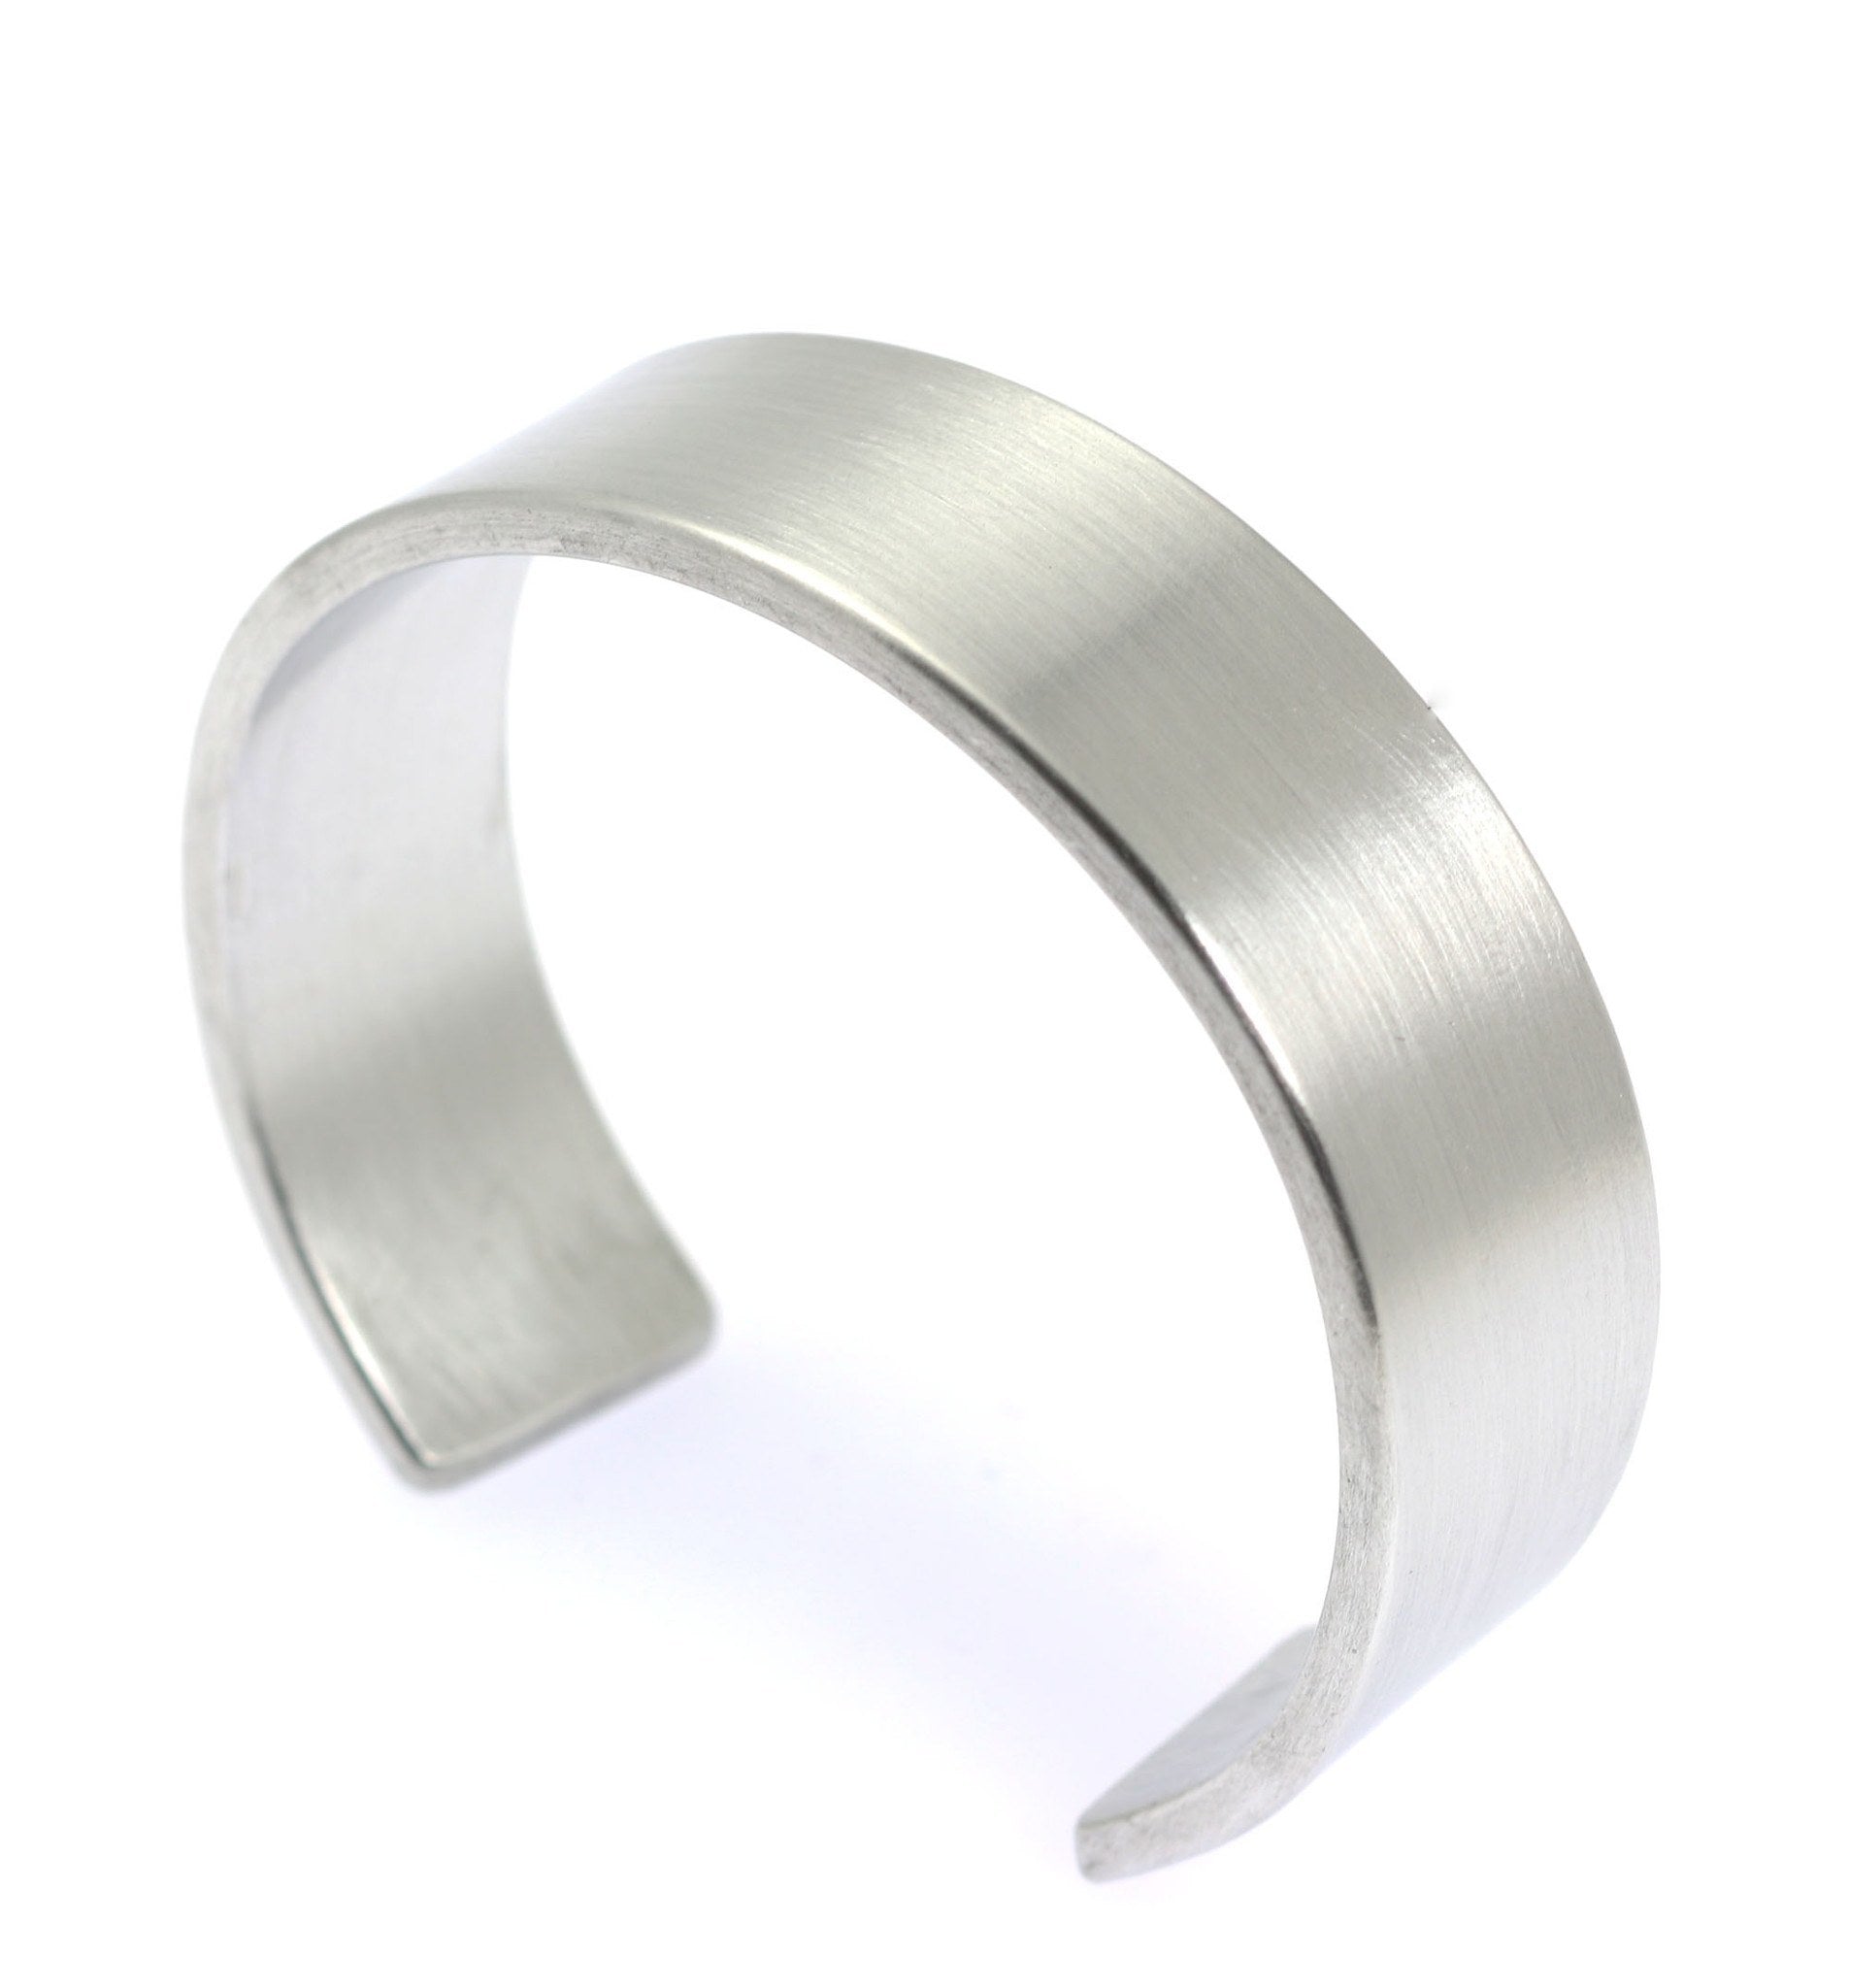 19mm Brushed Aluminum Cuff Bracelet - Right Side View